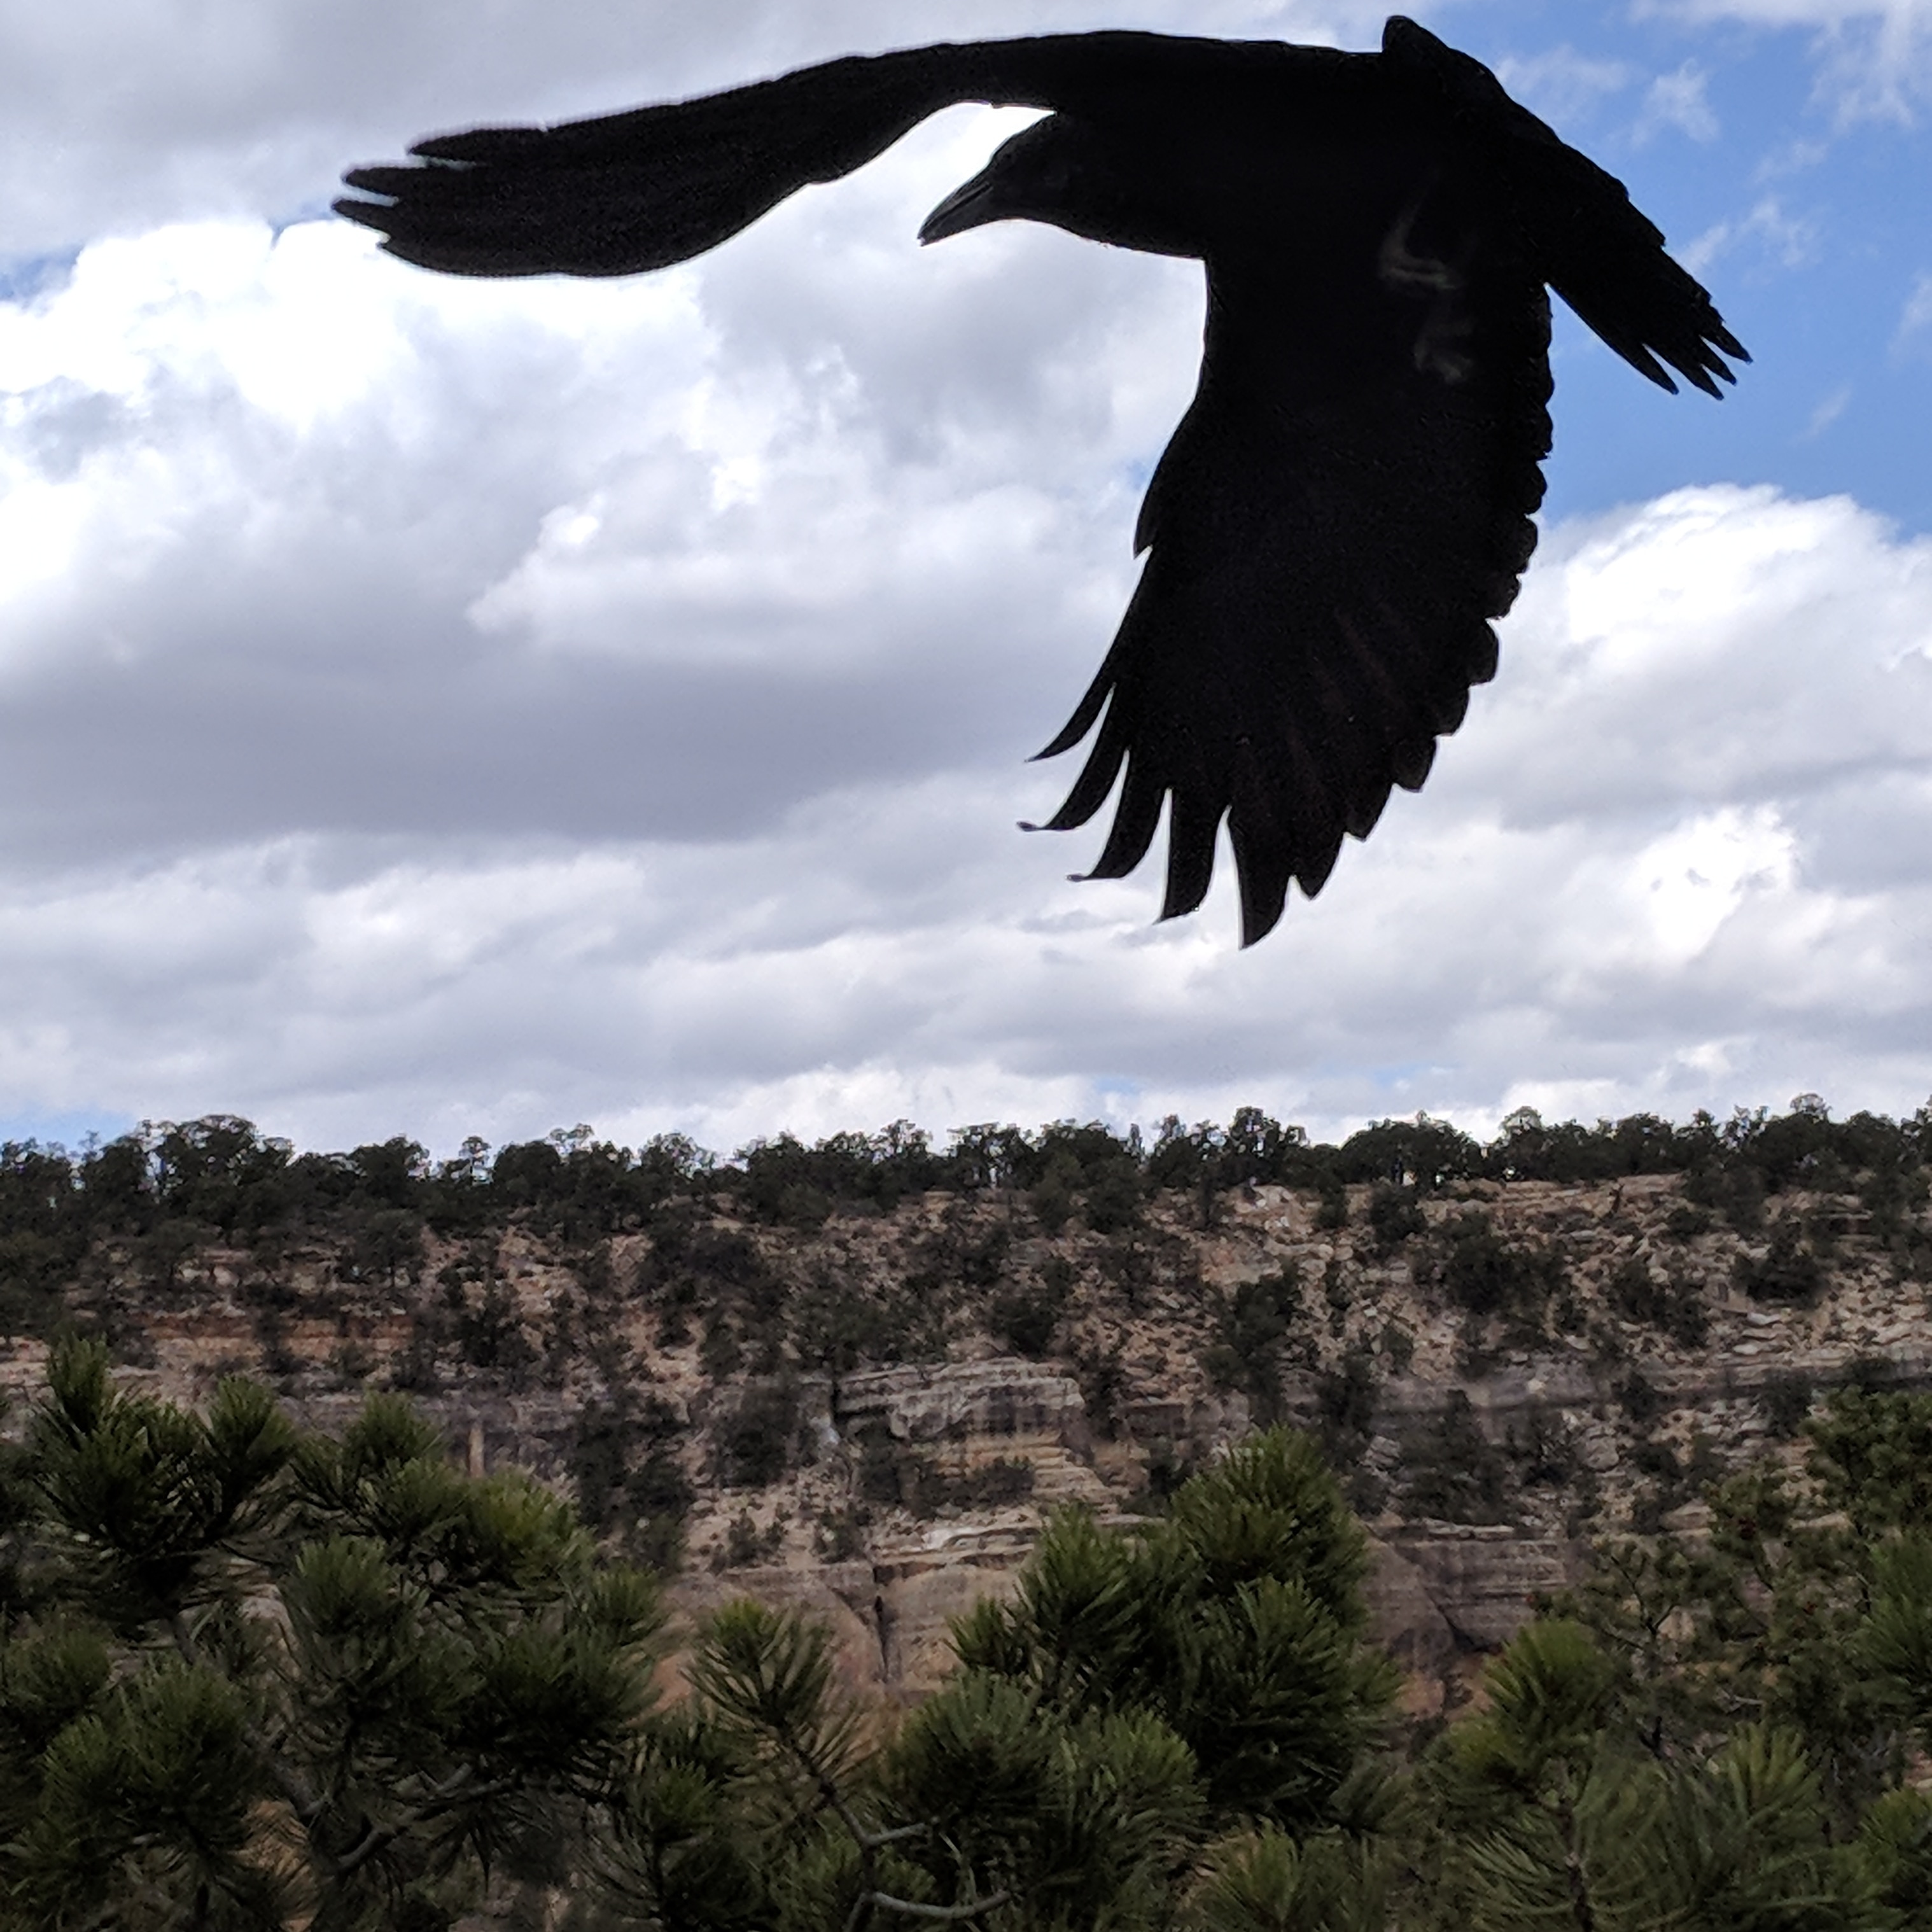 Quoth the Raven, Nevermore (Grand Canyon)